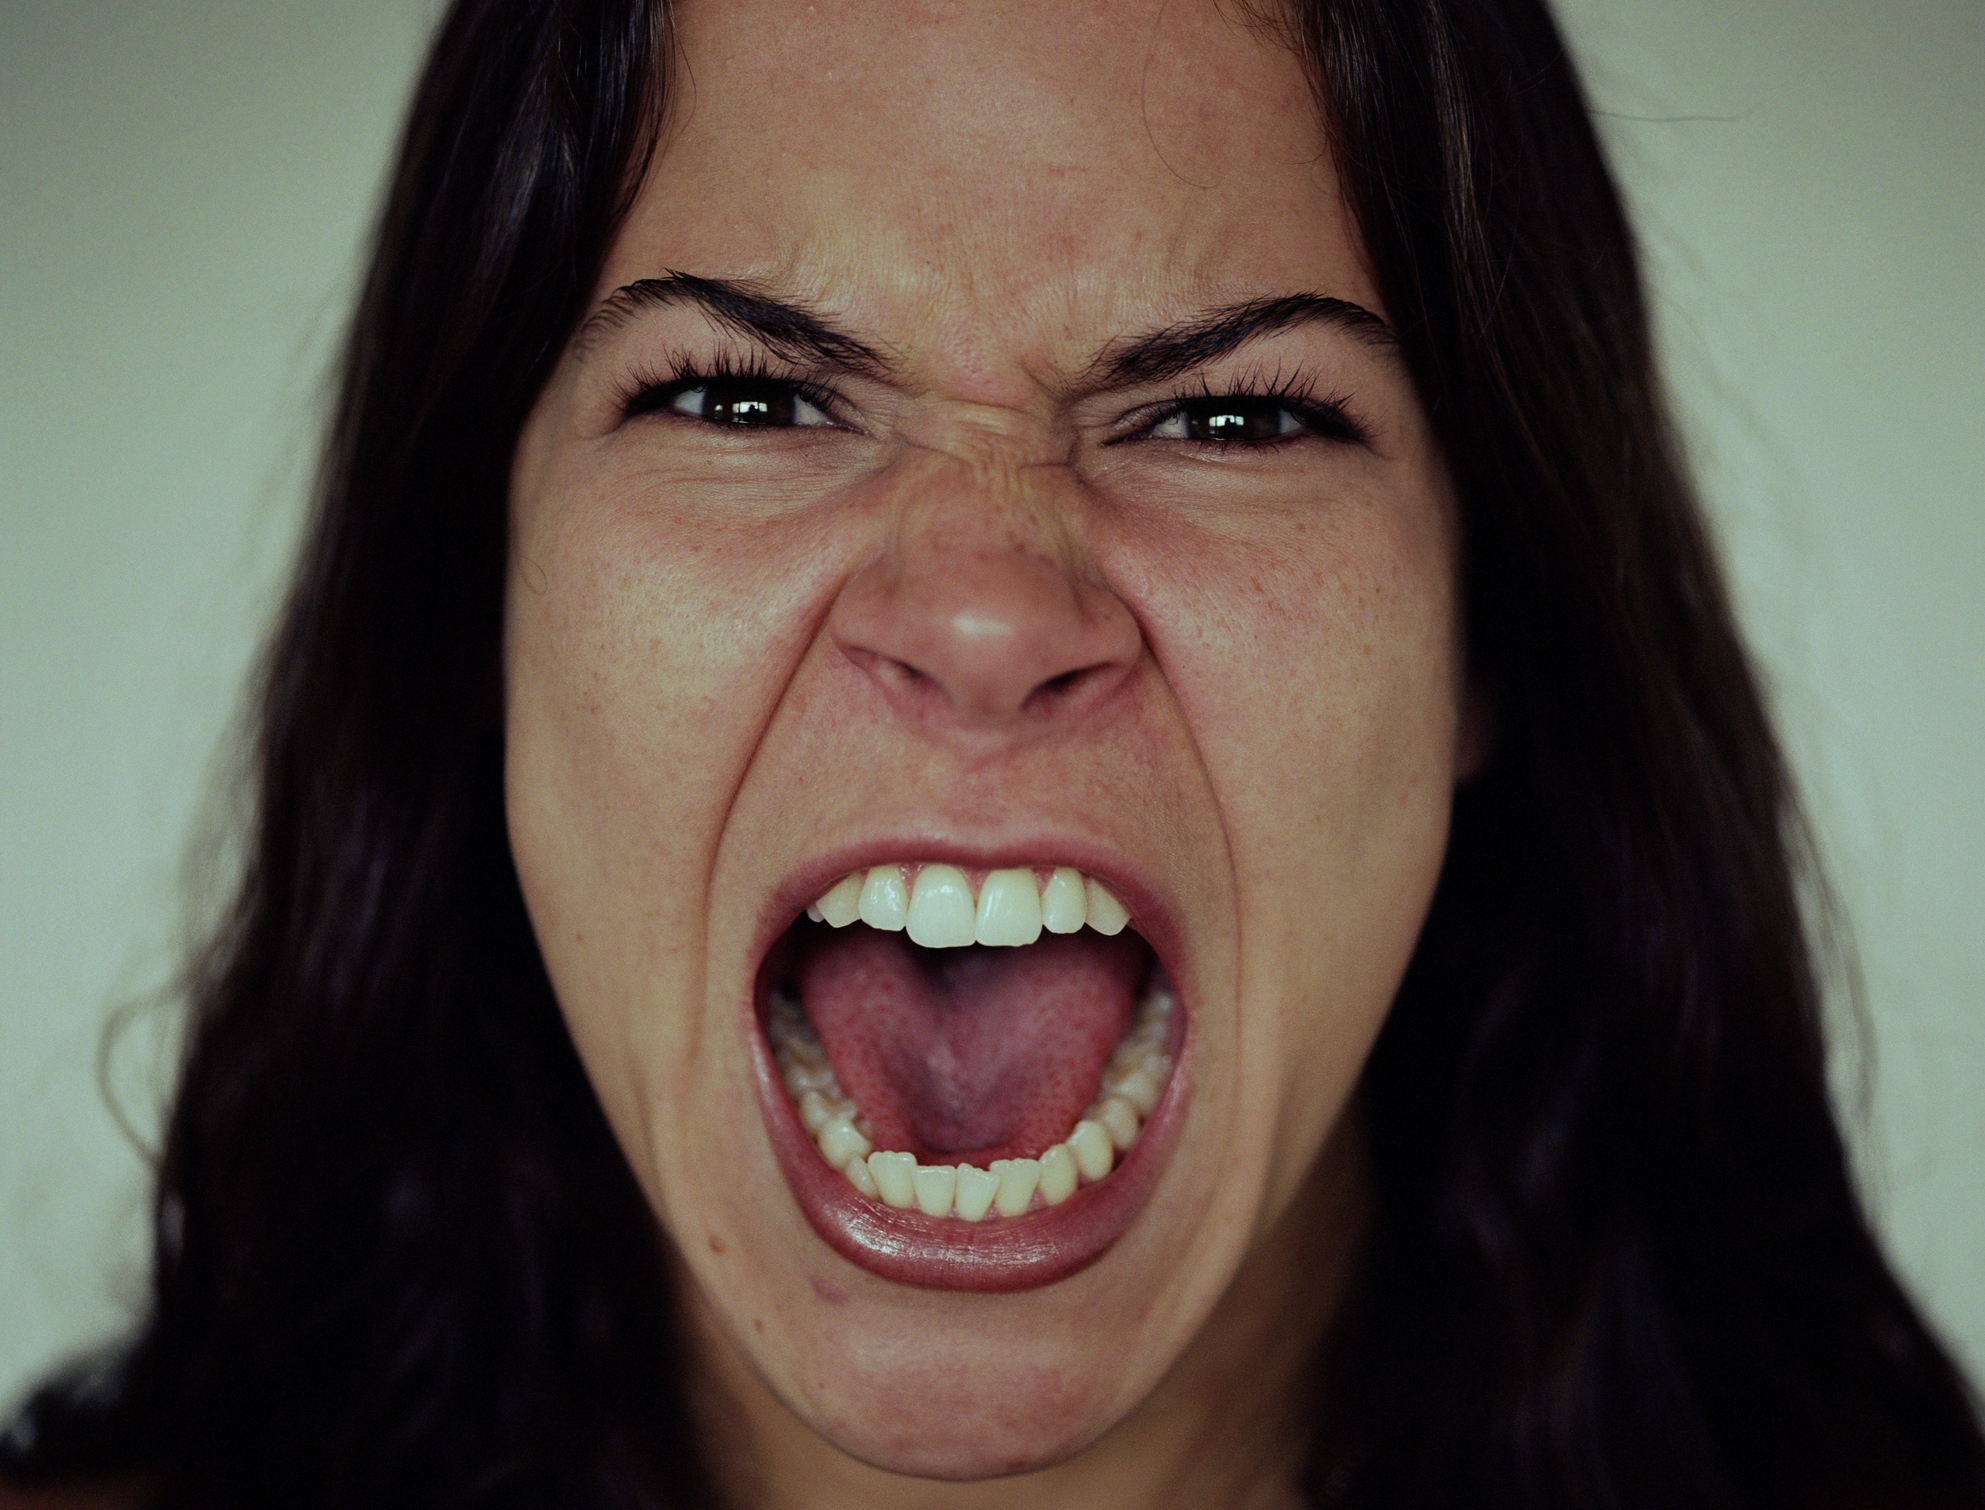 Young woman screaming, close-up